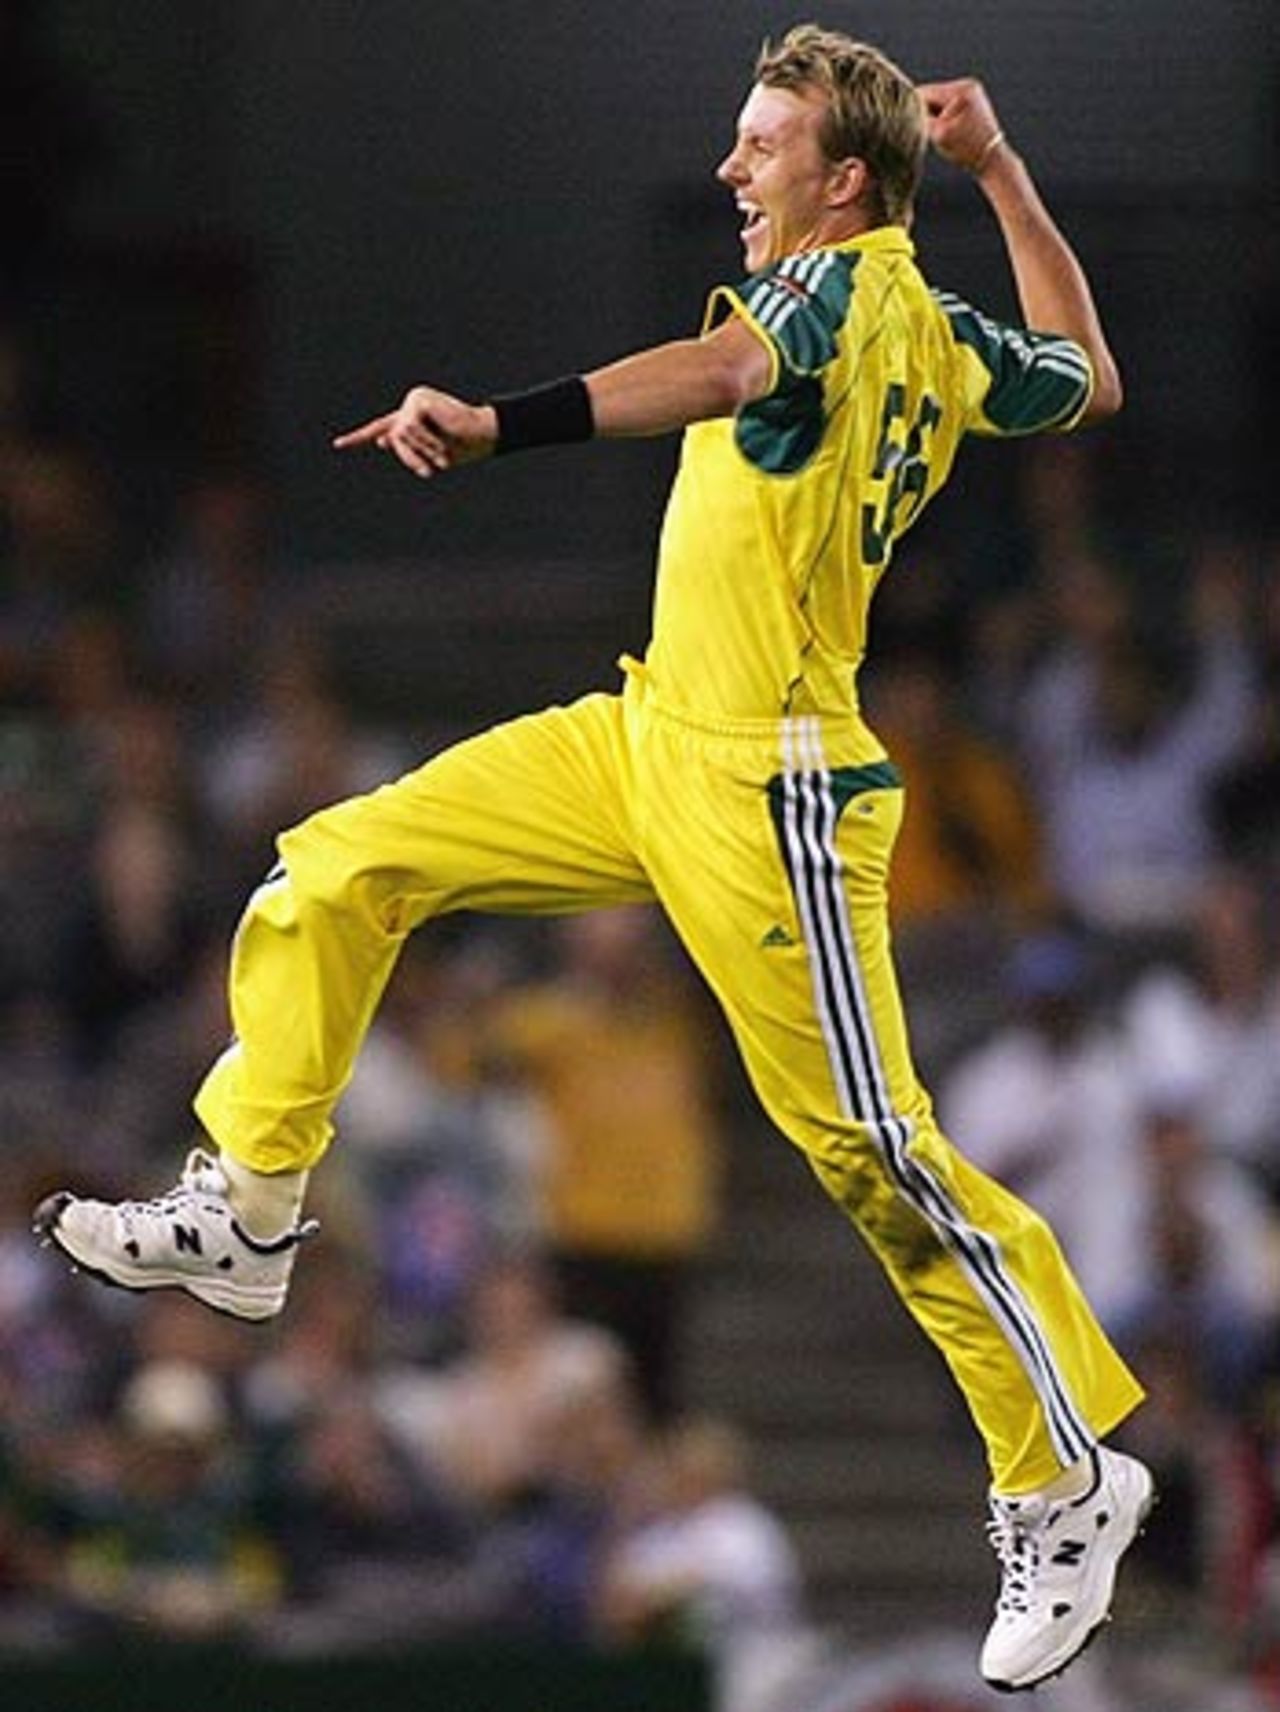 Brett Lee rocked South Africa with his spell of 4 for 30 at Melbourne, Australia v South Africa, VB Series, Melbourne, February 3 2006 